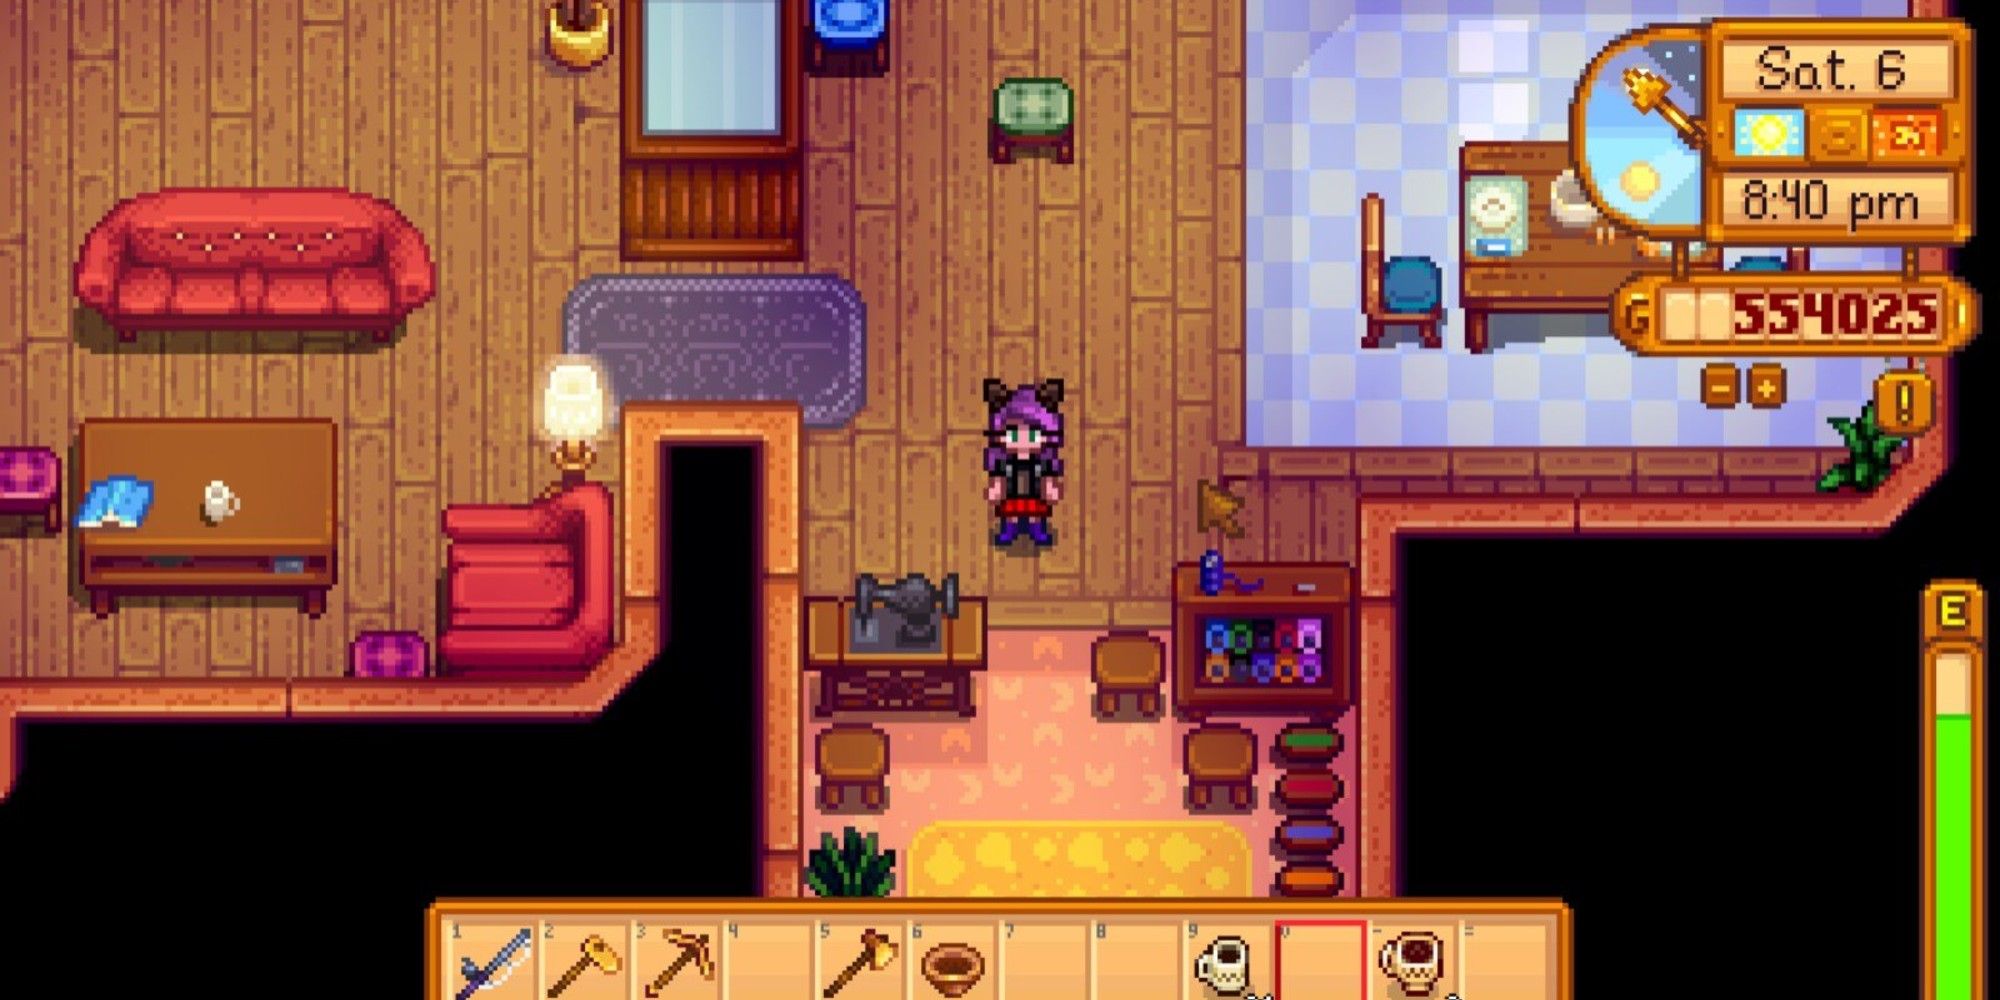 player standing next to emilys sewing machine in her house